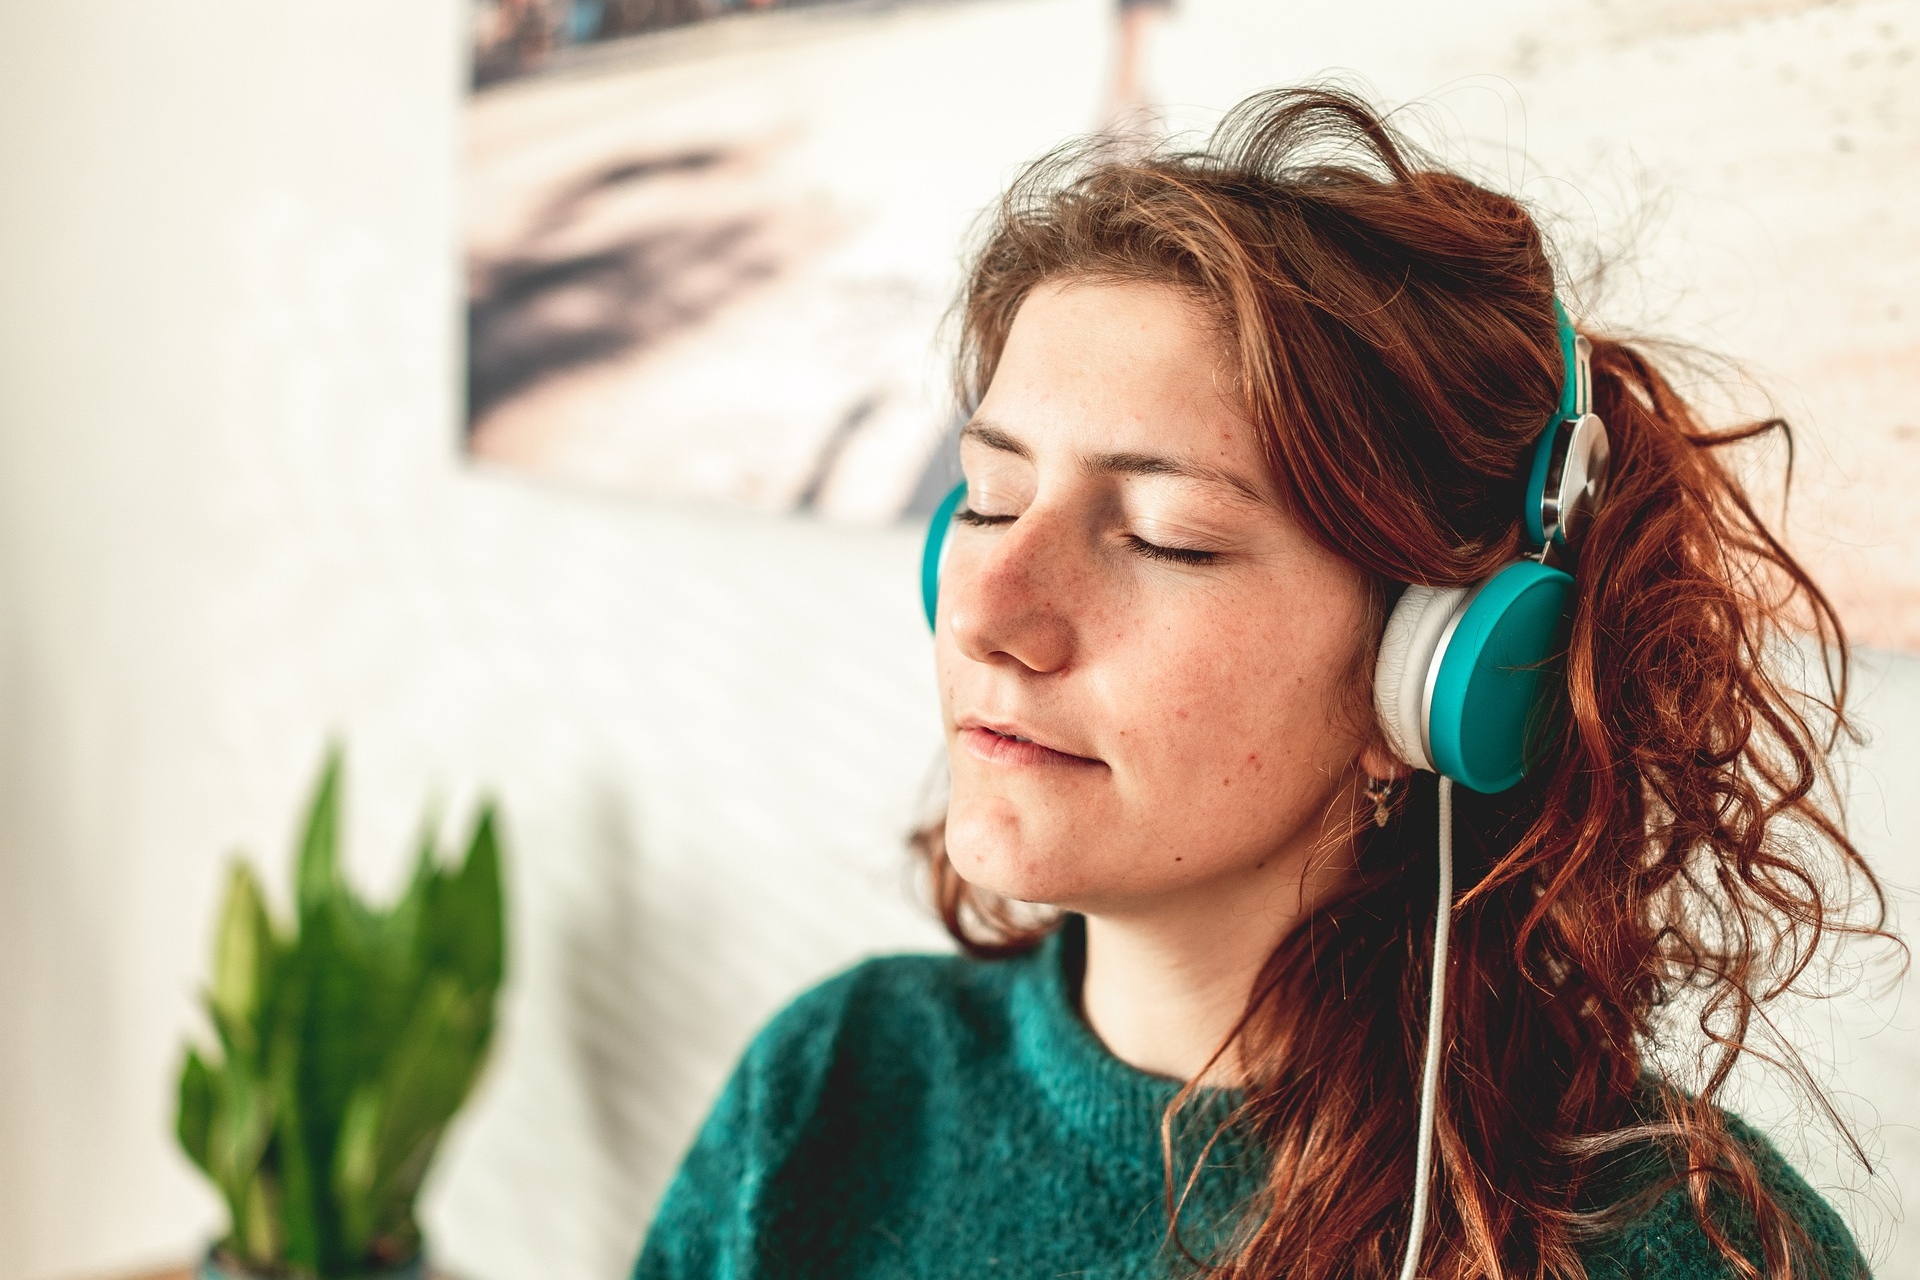 A woman wearing headphones with her eyes closed.